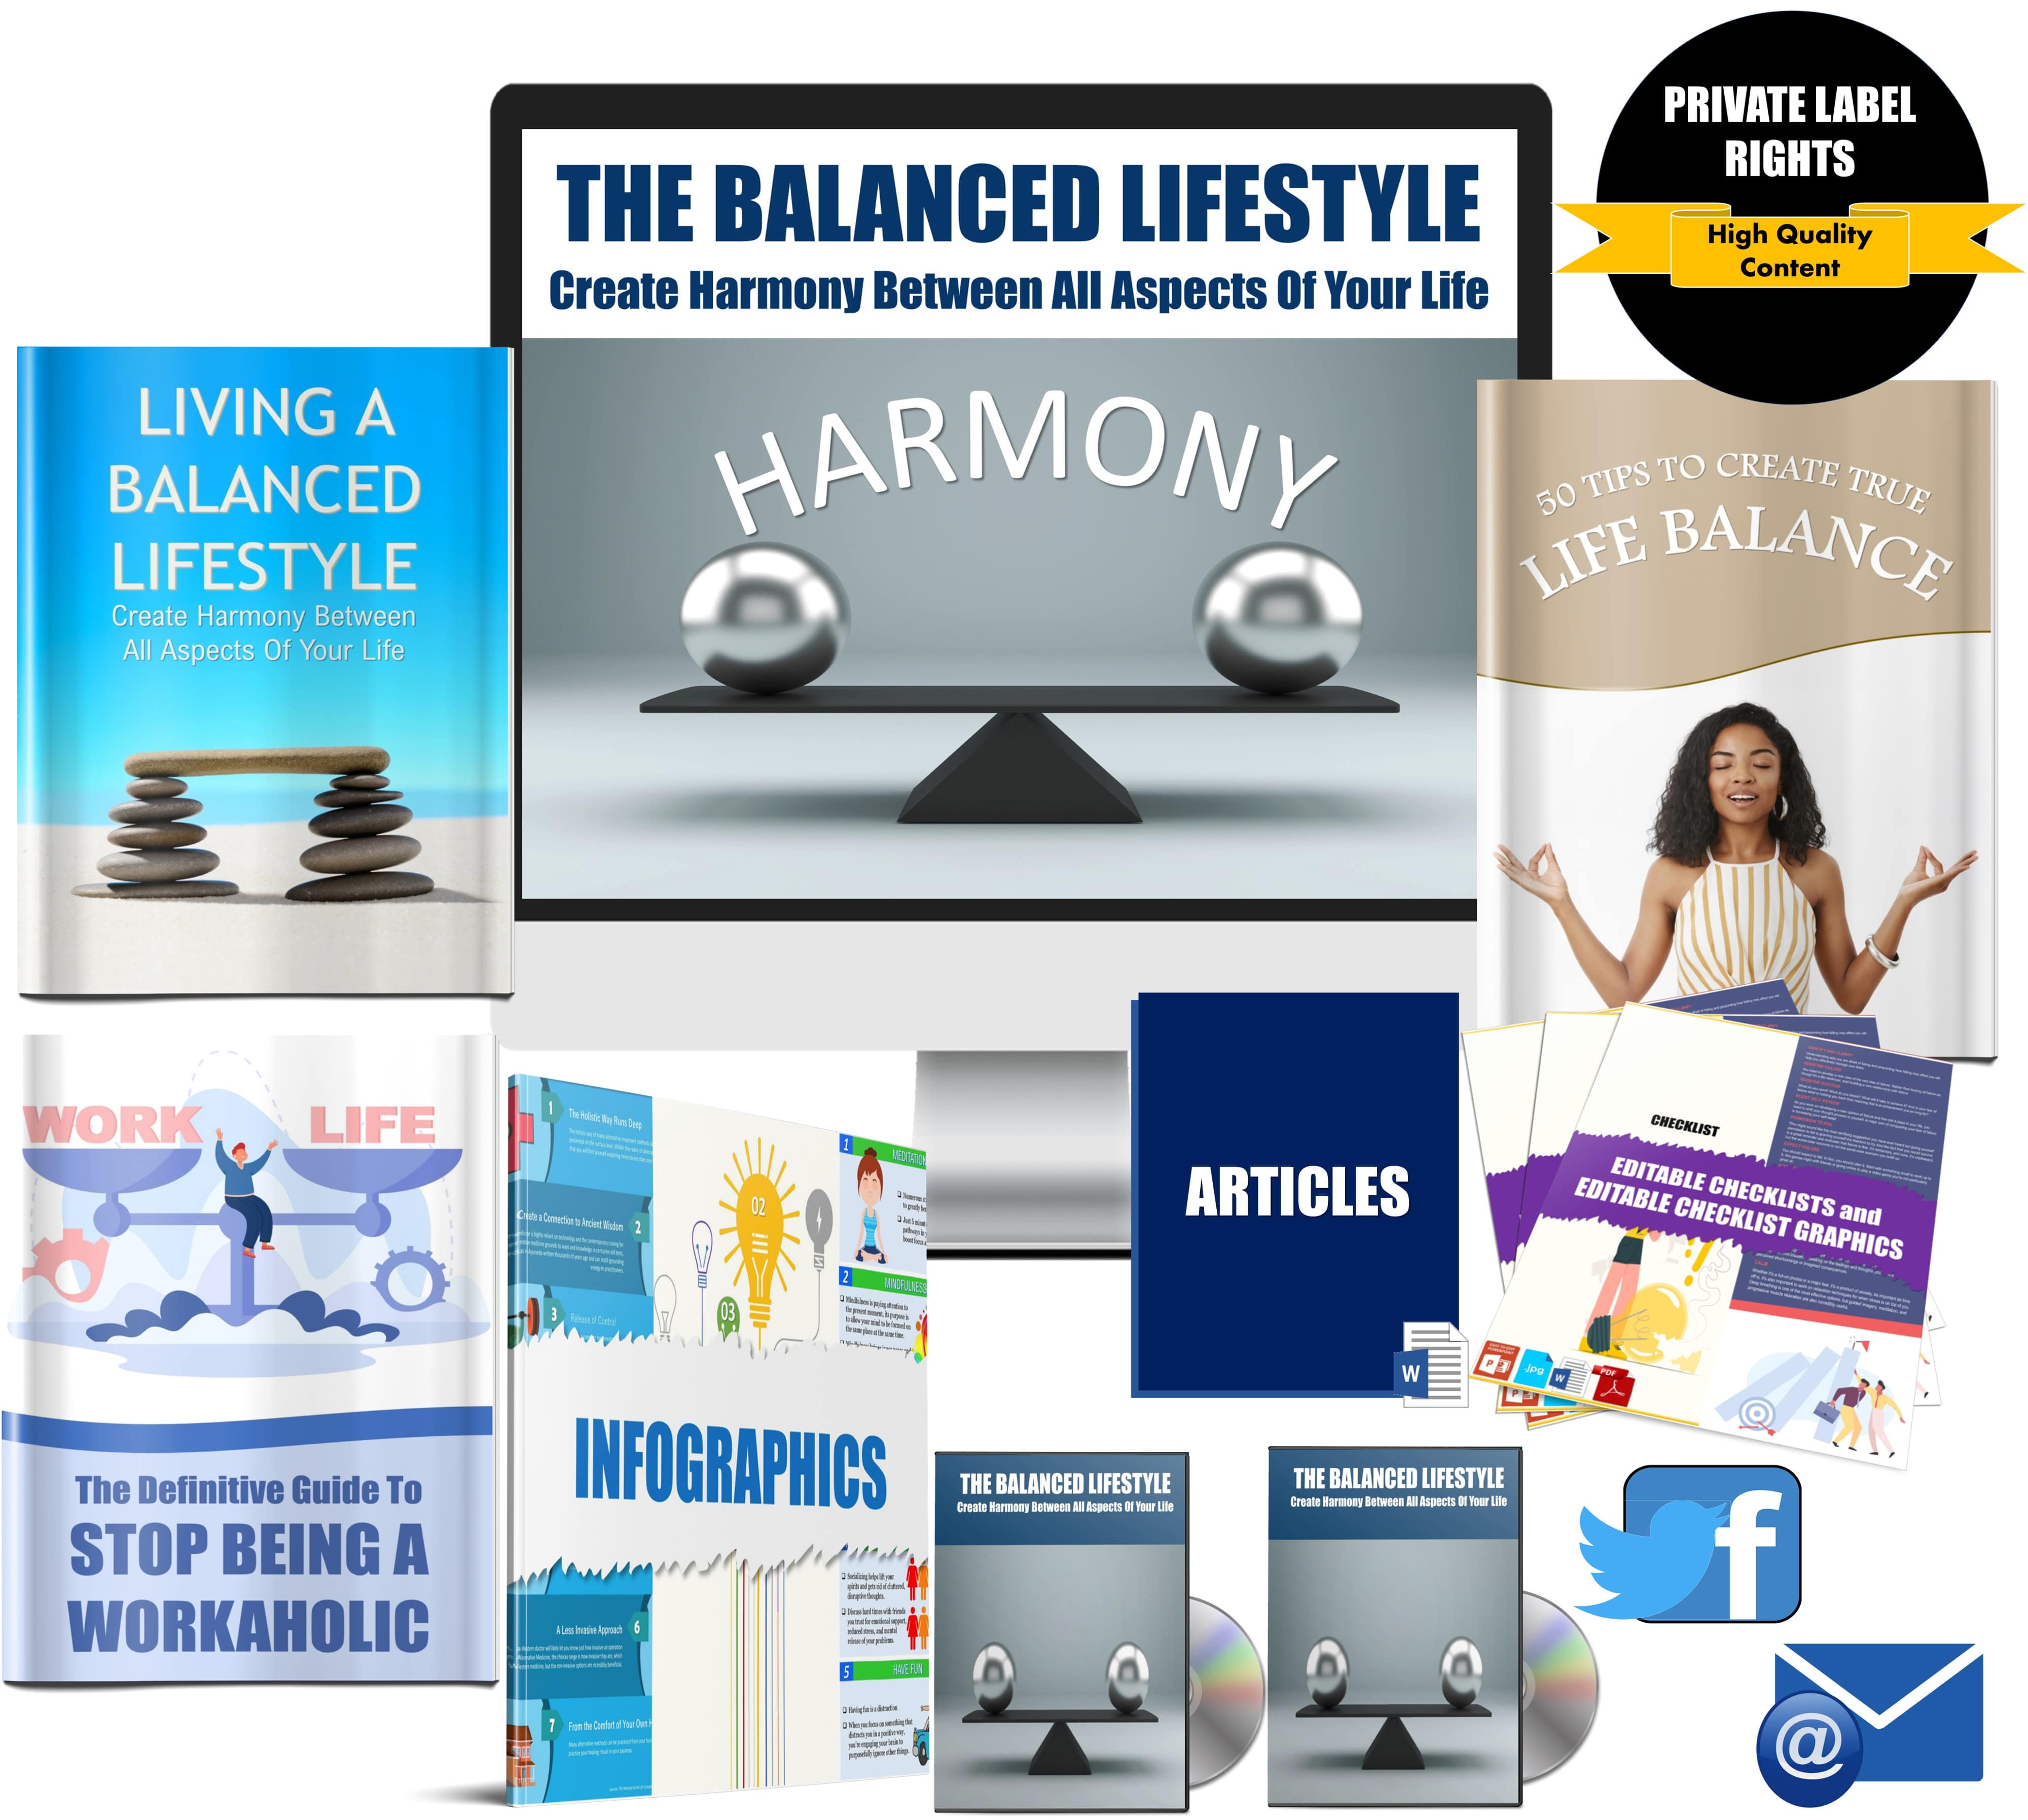 The Balanced Lifestyle - Create Harmony Between All Aspects Of Your Life Giant Content Pack PLR Rights